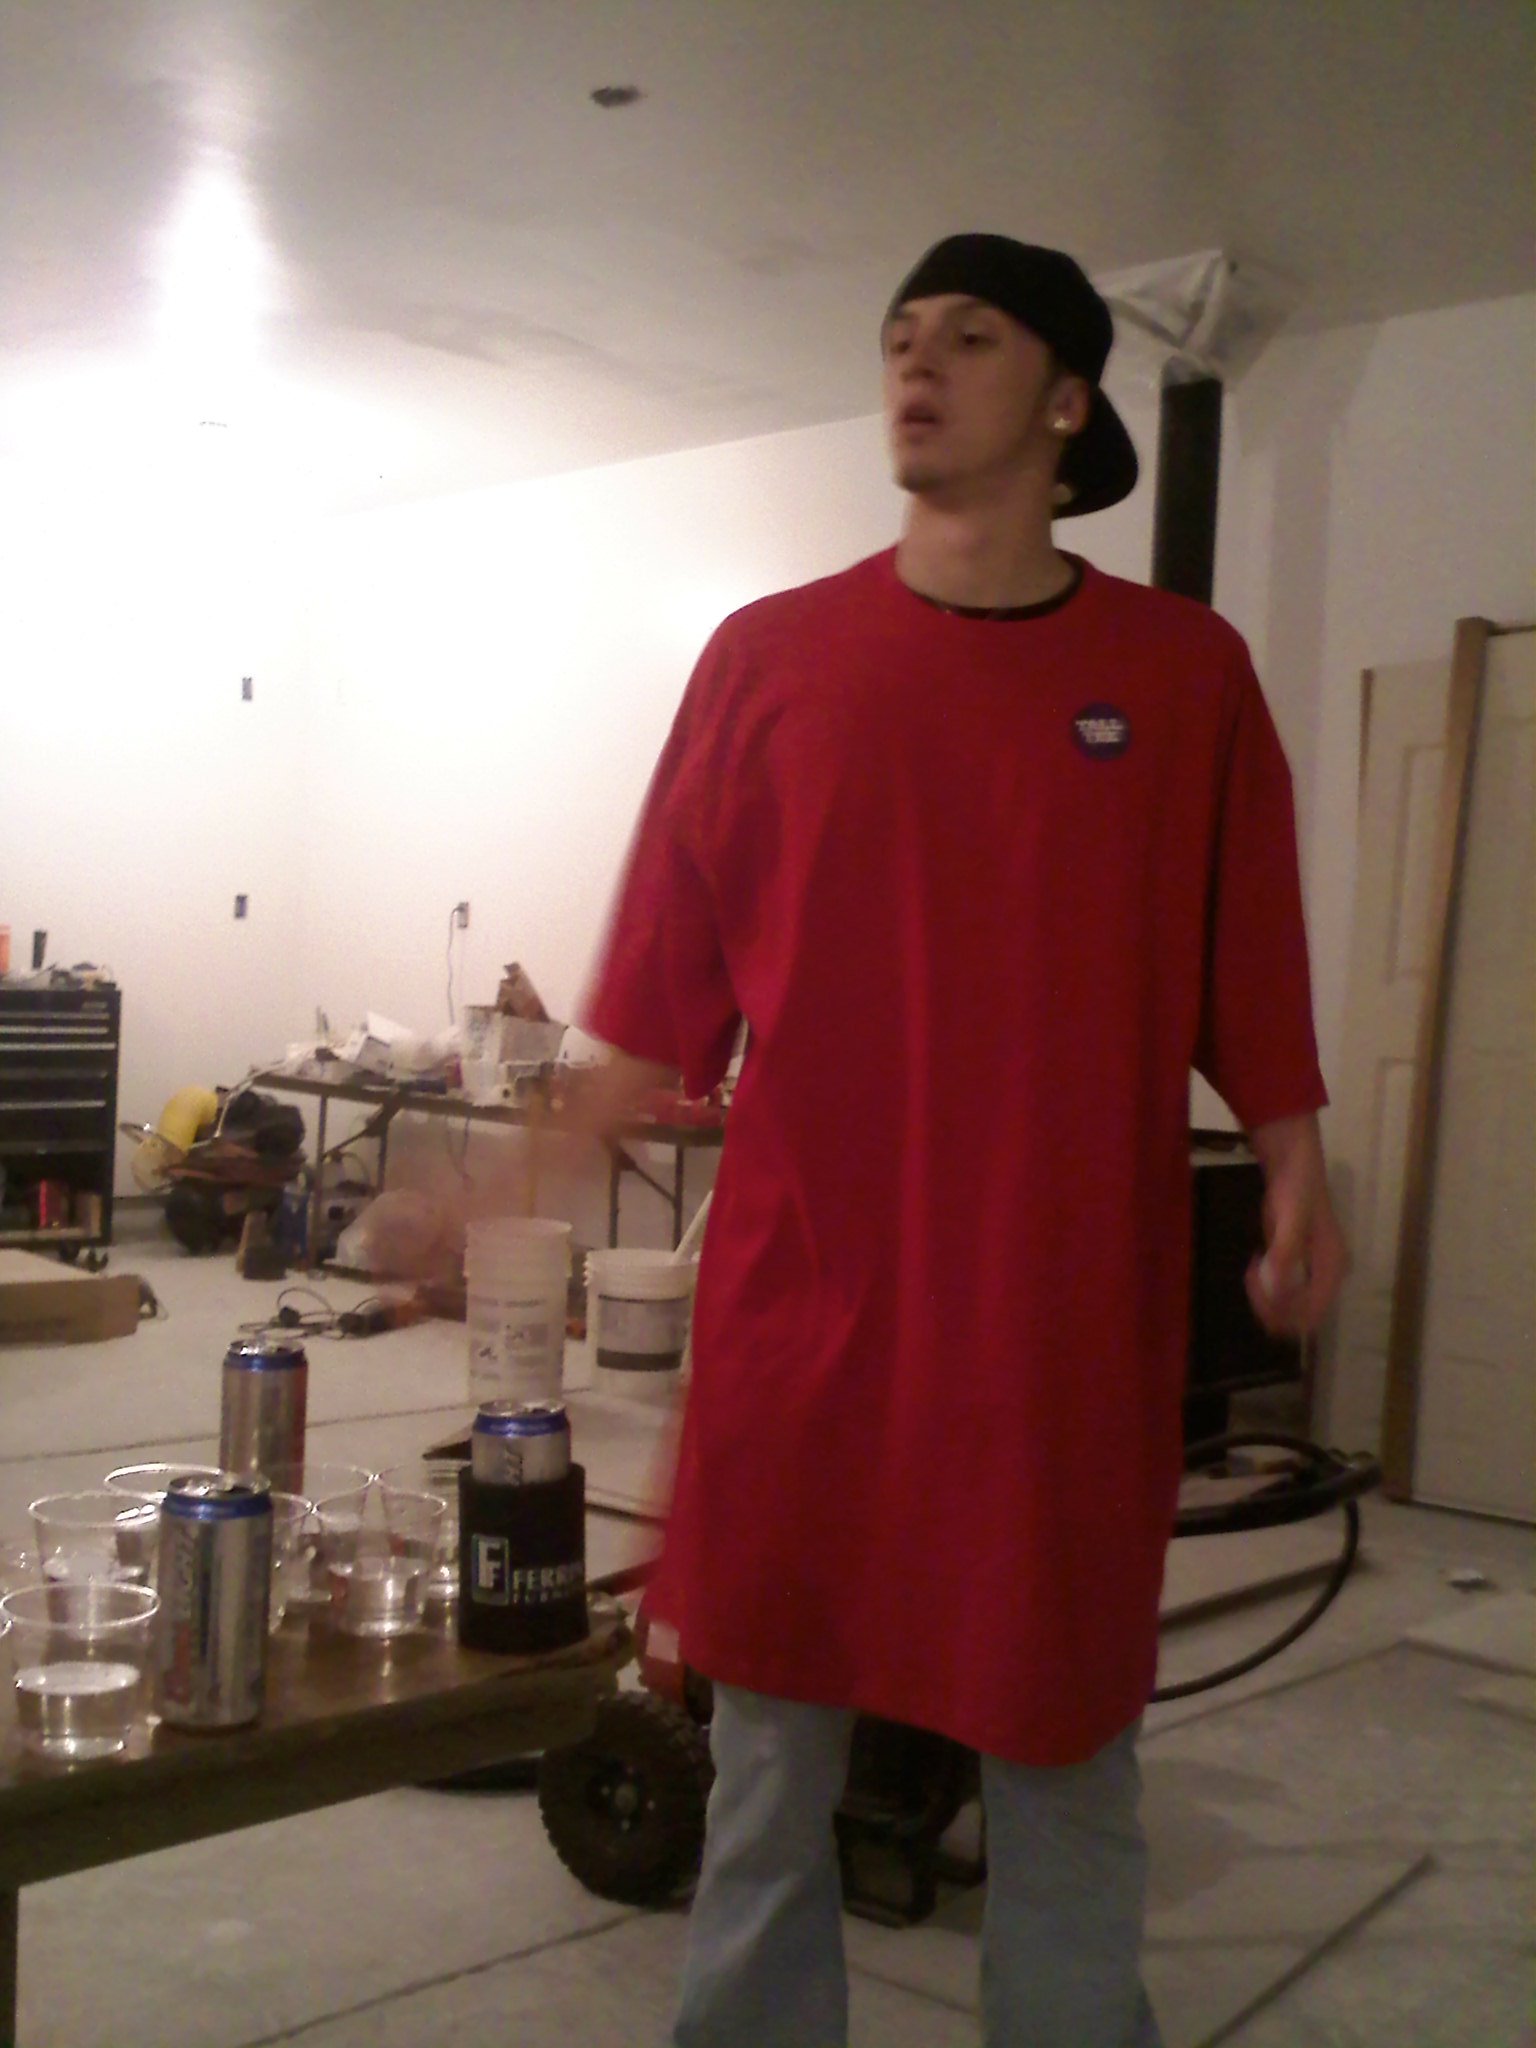 Beer pong and tall tees